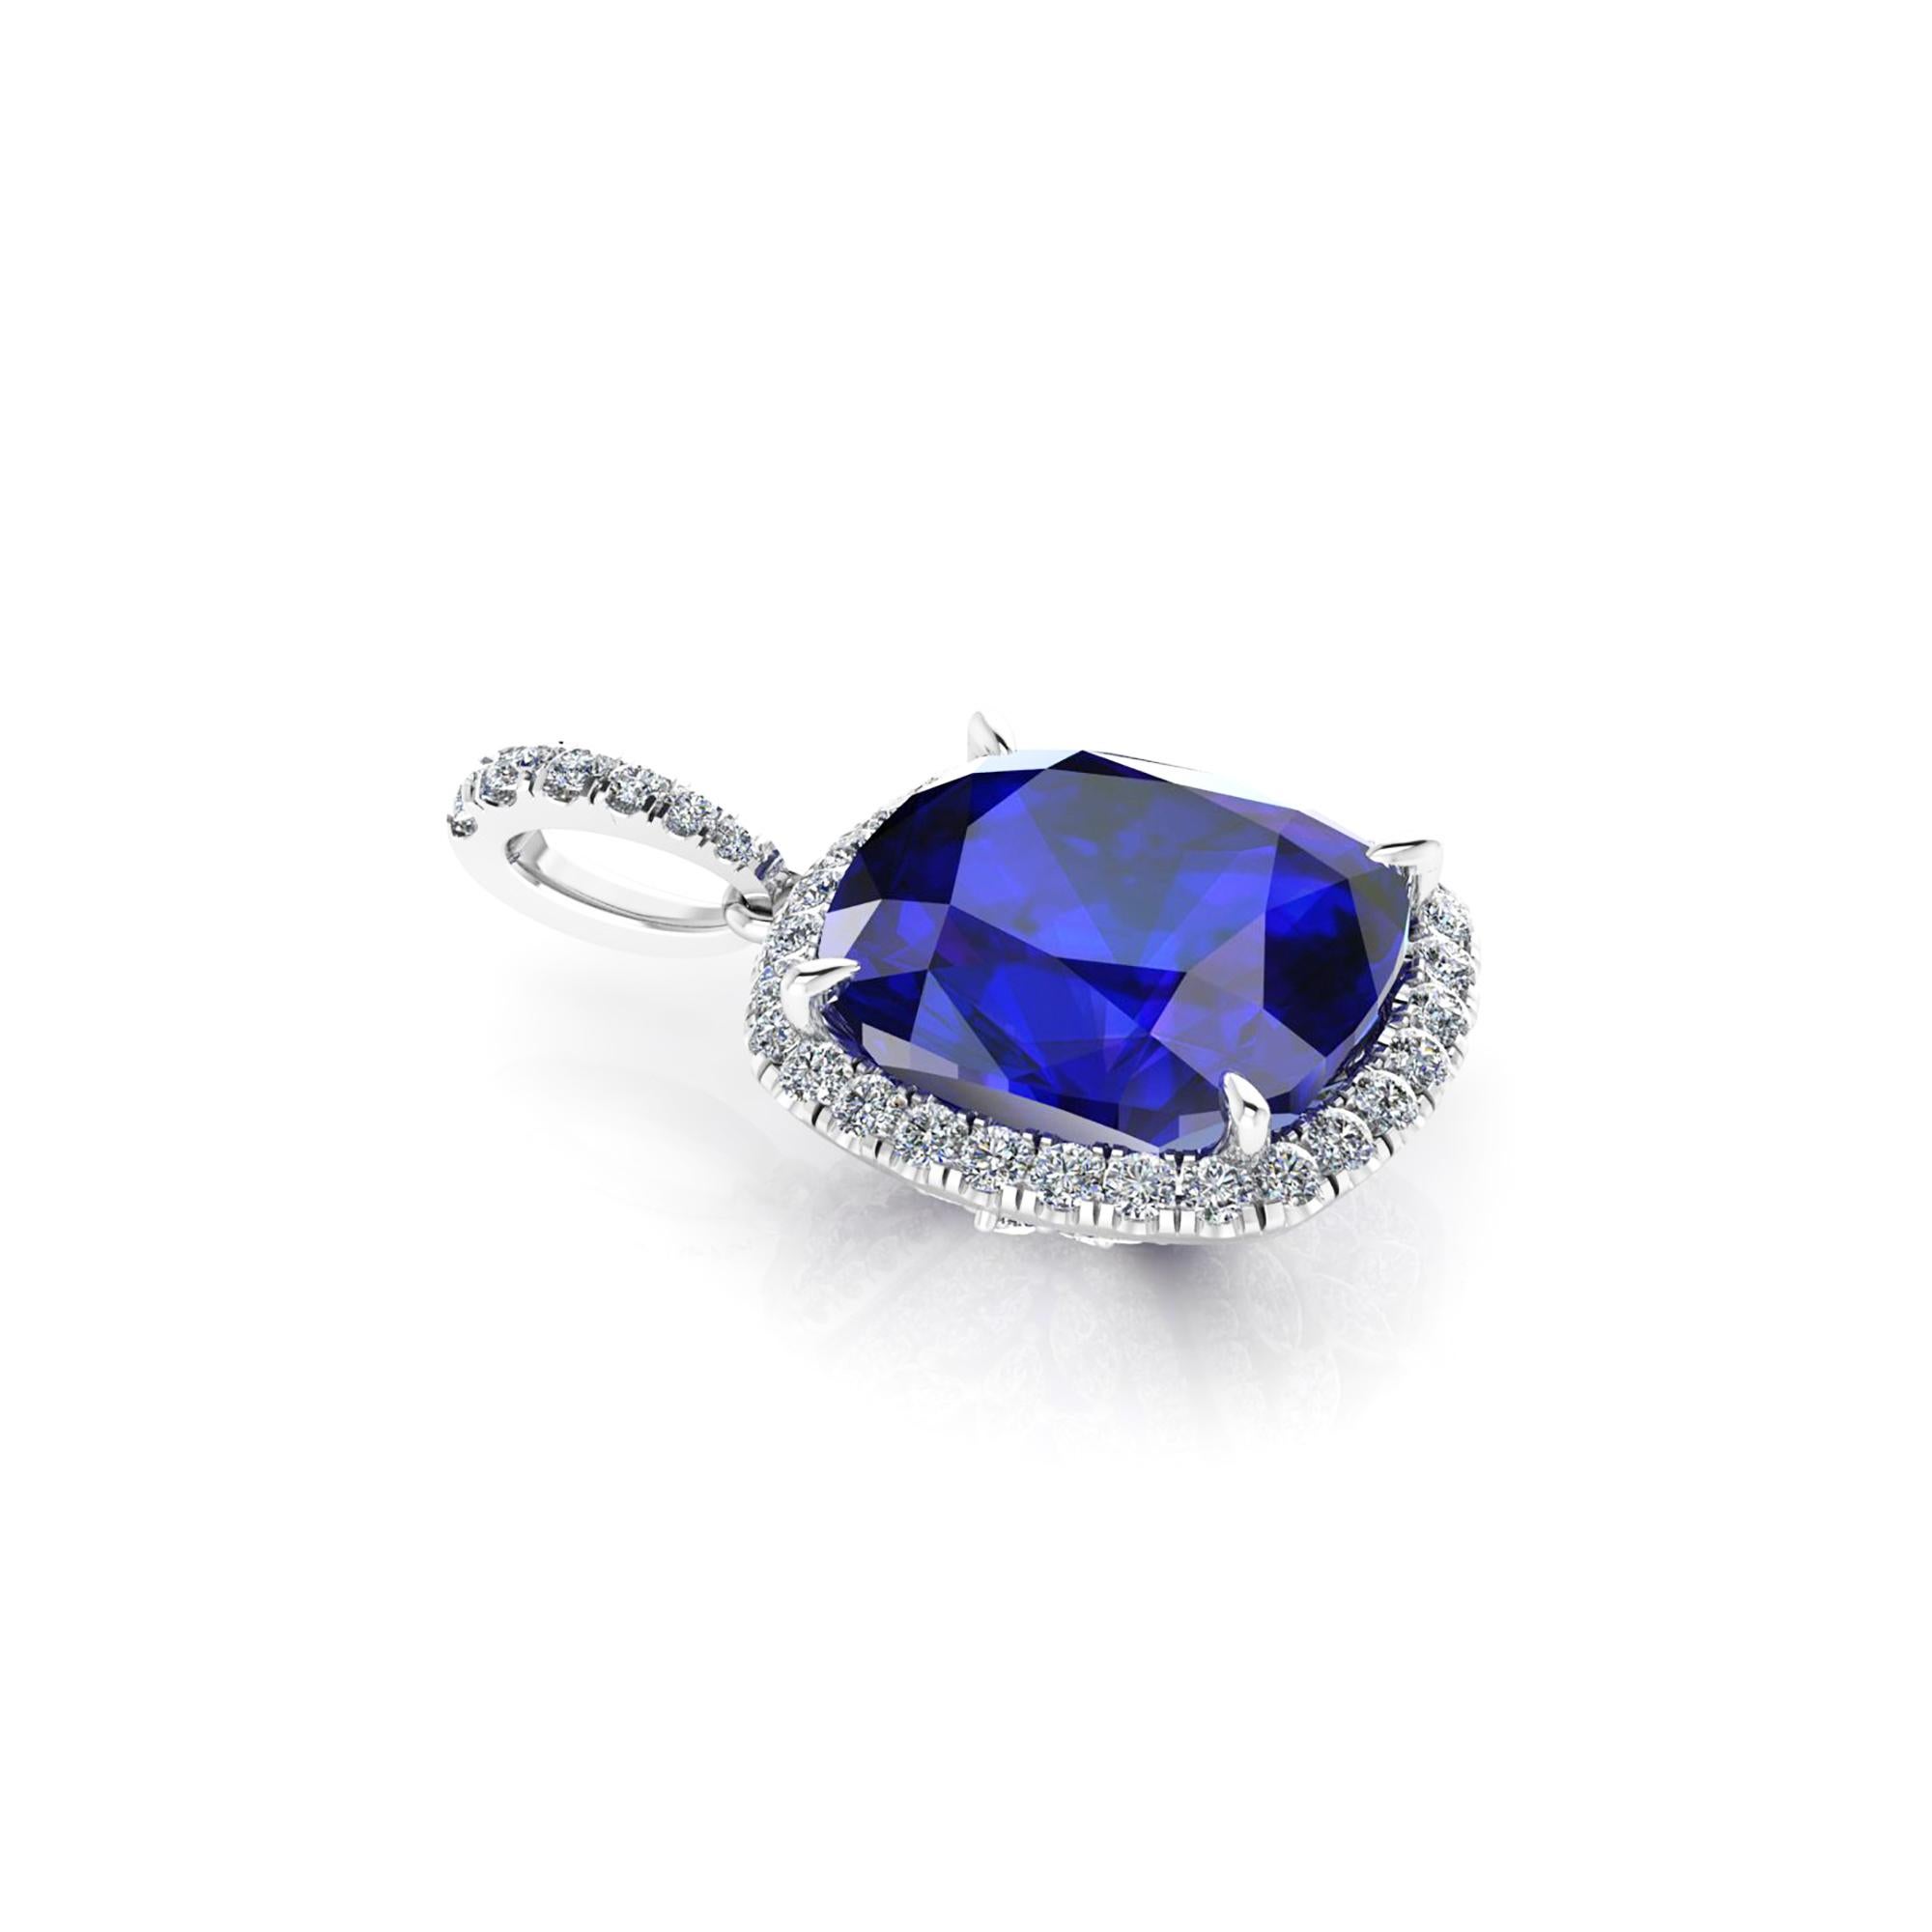  GiA Certified 9.23 carat natural Tanzanite of a deep blue and purple refraction, with a halo of white round and marquise diamonds set everywhere under the basket and on the bail, for an approximate total diamond weight of 1.35 carats, Platinum 950